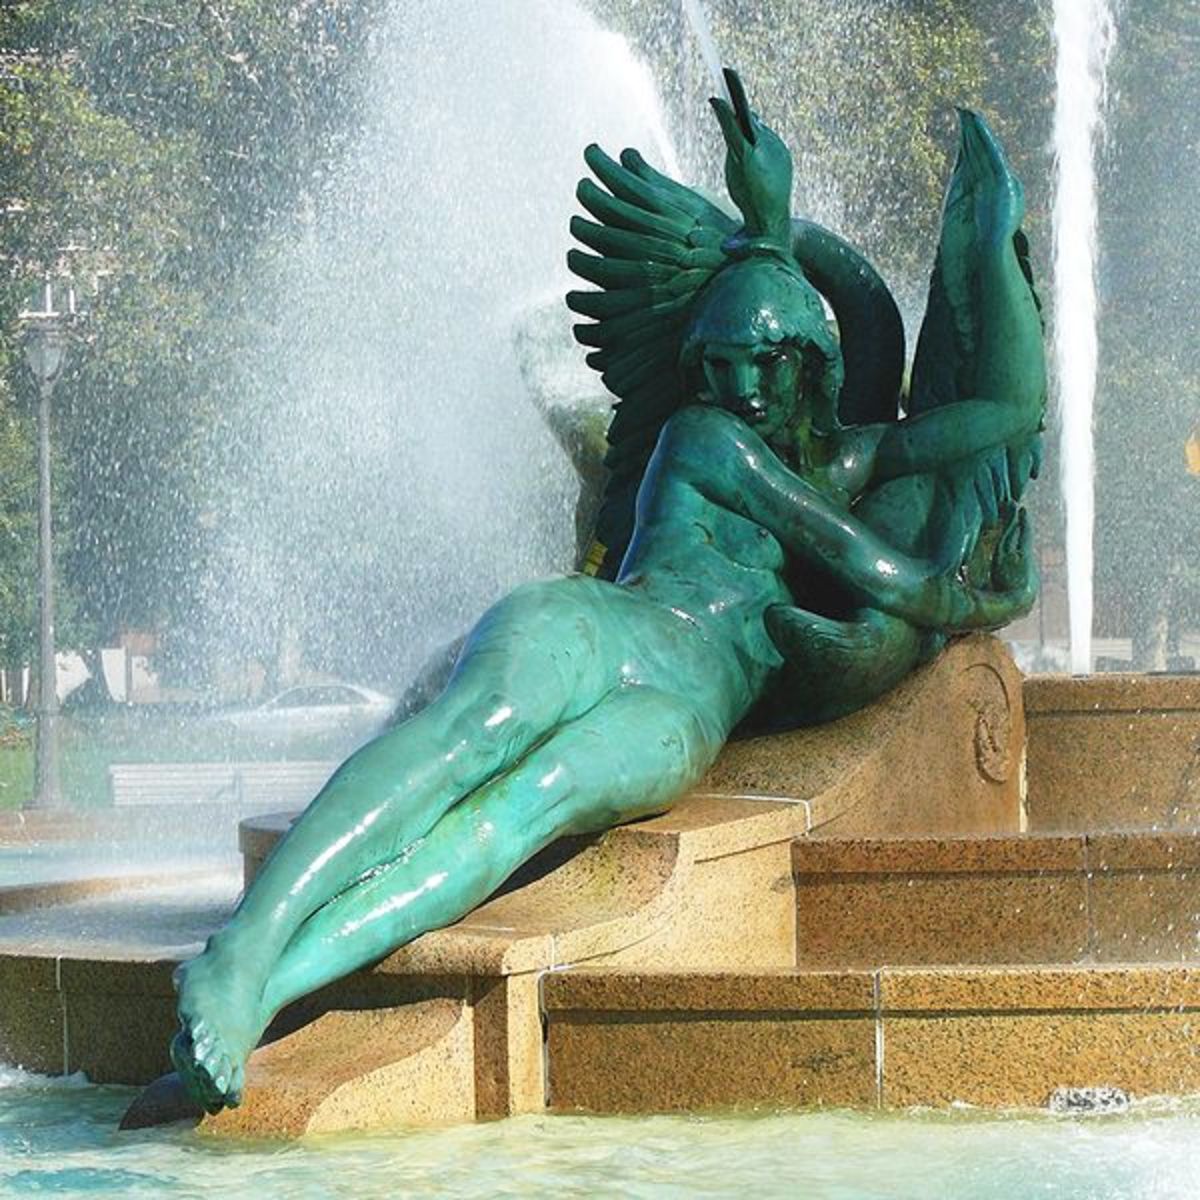 The Wissahickon Girl is a figure on the Swann Memorial Fountain in Logan Square in Philadelphia. Representing Wissahickon Creek, she also reminds us that the hermit monks saw visions of angels.